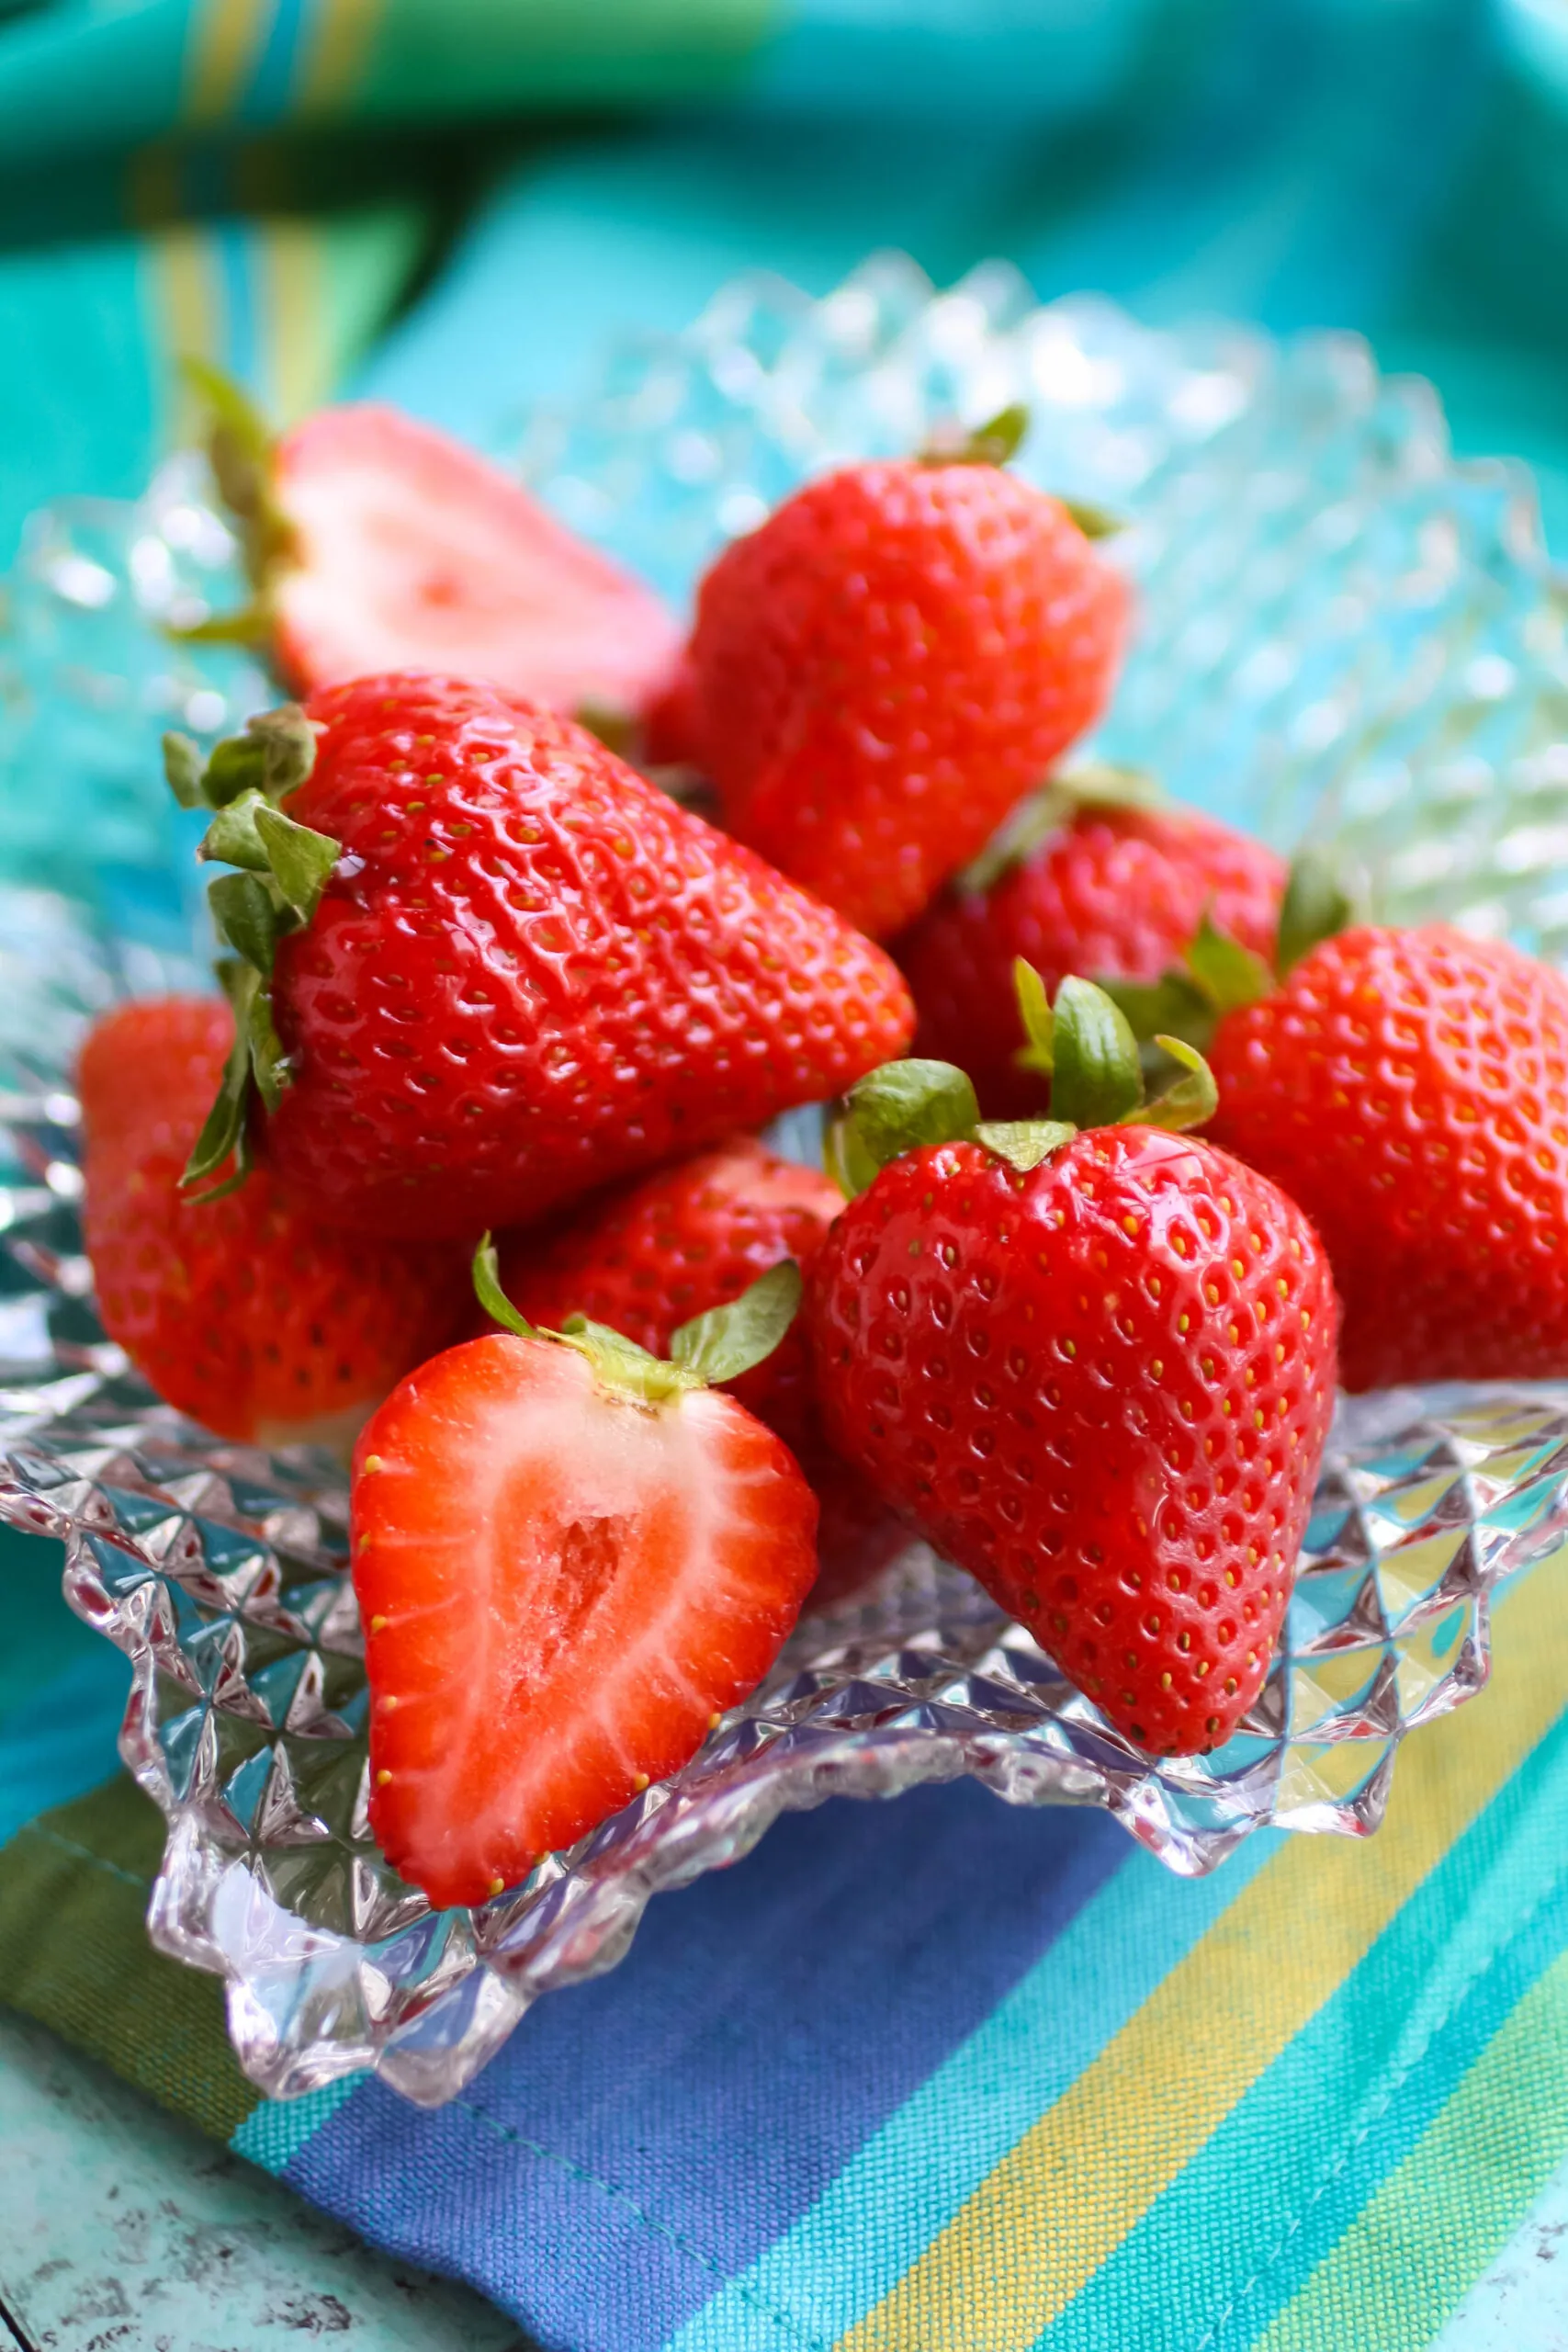 A plate of fresh strawberries.